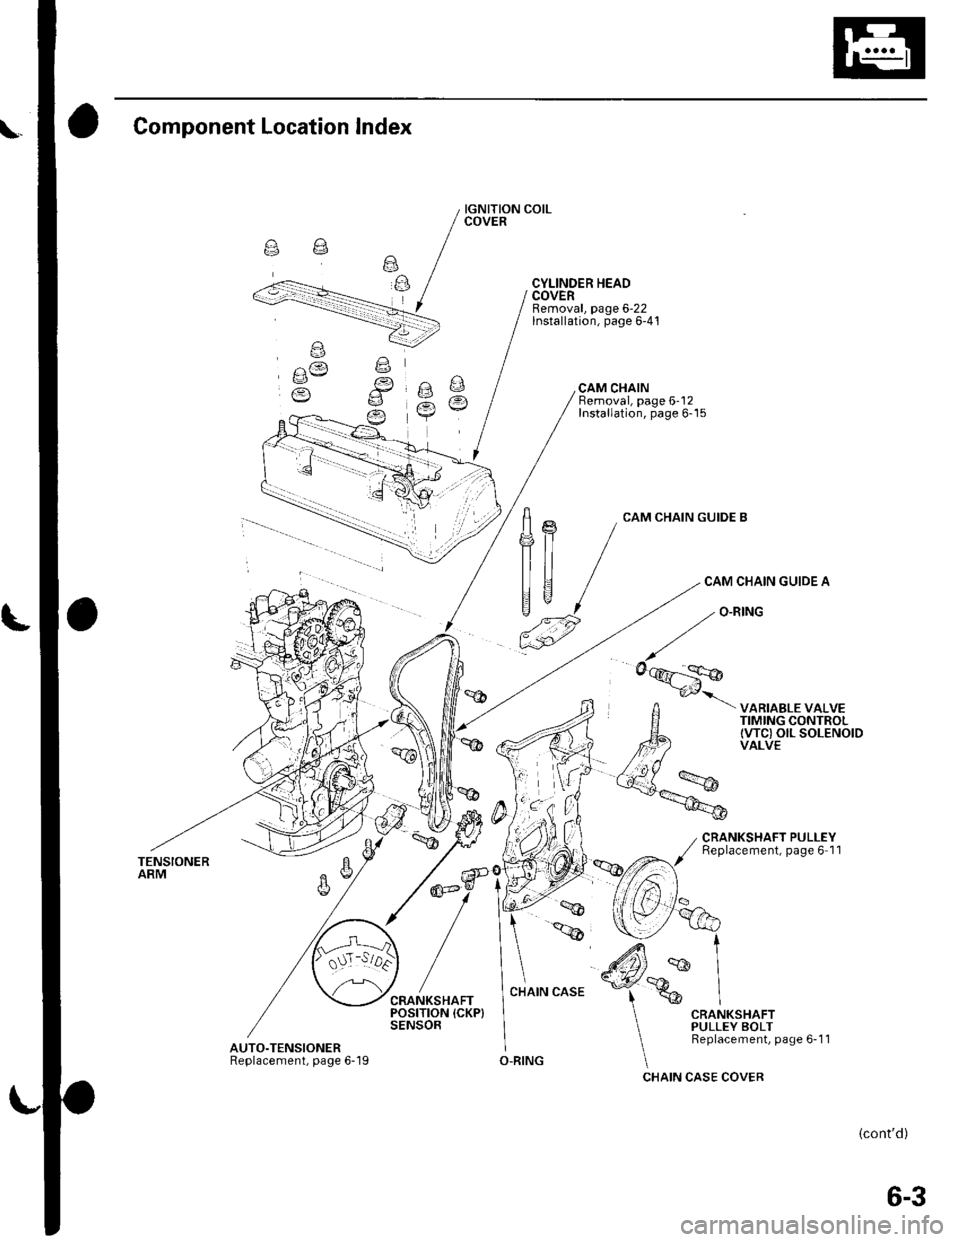 HONDA CIVIC 2003 7.G Workshop Manual Component Location lndex
TENSIONERARM
AUTO.TENSIONERReplacement, page 6-l I
IGNITION COILCOVER
CYLINDER HEADCOVERRemoval, page 6-22lnstallation, page 6-41
CAM CHAINBemoval, page 6-12Installation, pa